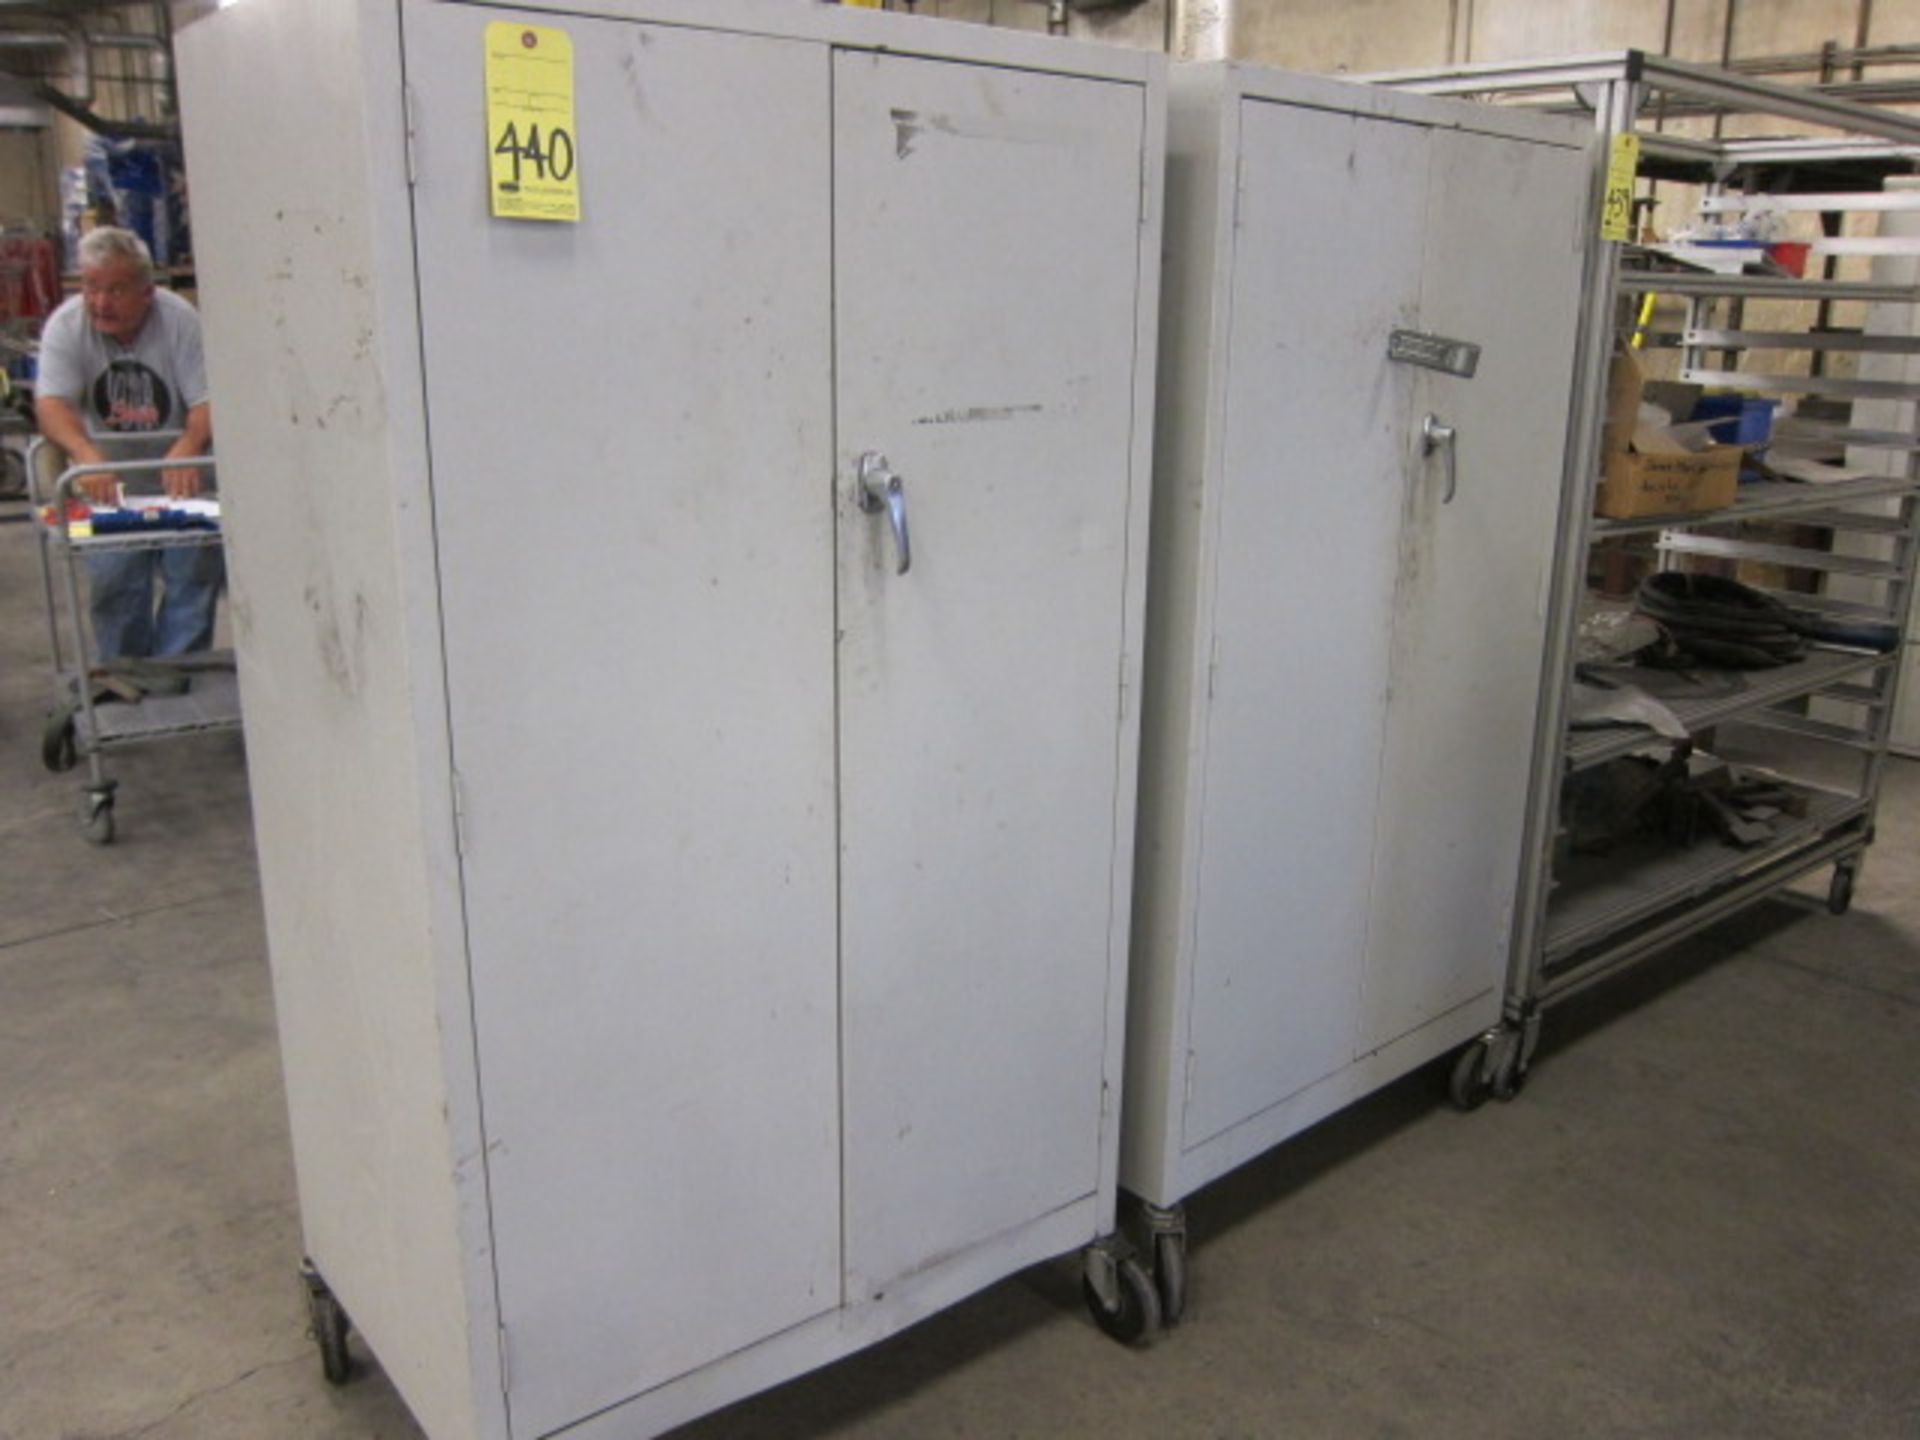 LOT OF ROLL-AROUND CABINETS (2), 24 x 36 x 66" ht., on wheels, w/contents